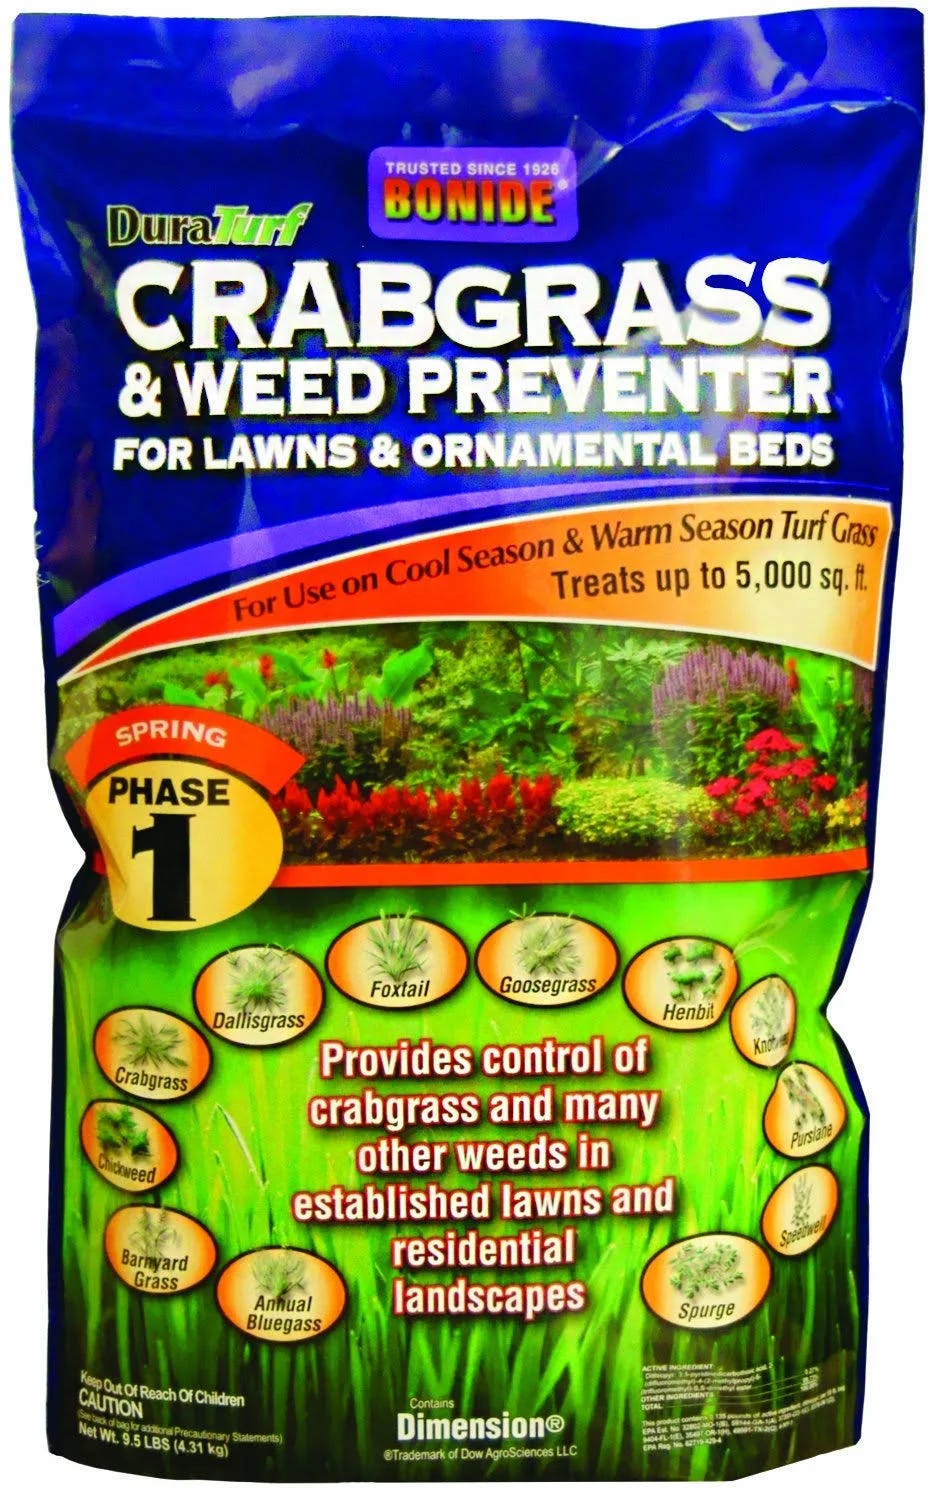 Pet Safe Crabgrass & Weed Preventer for Lawns and Gardens | Image